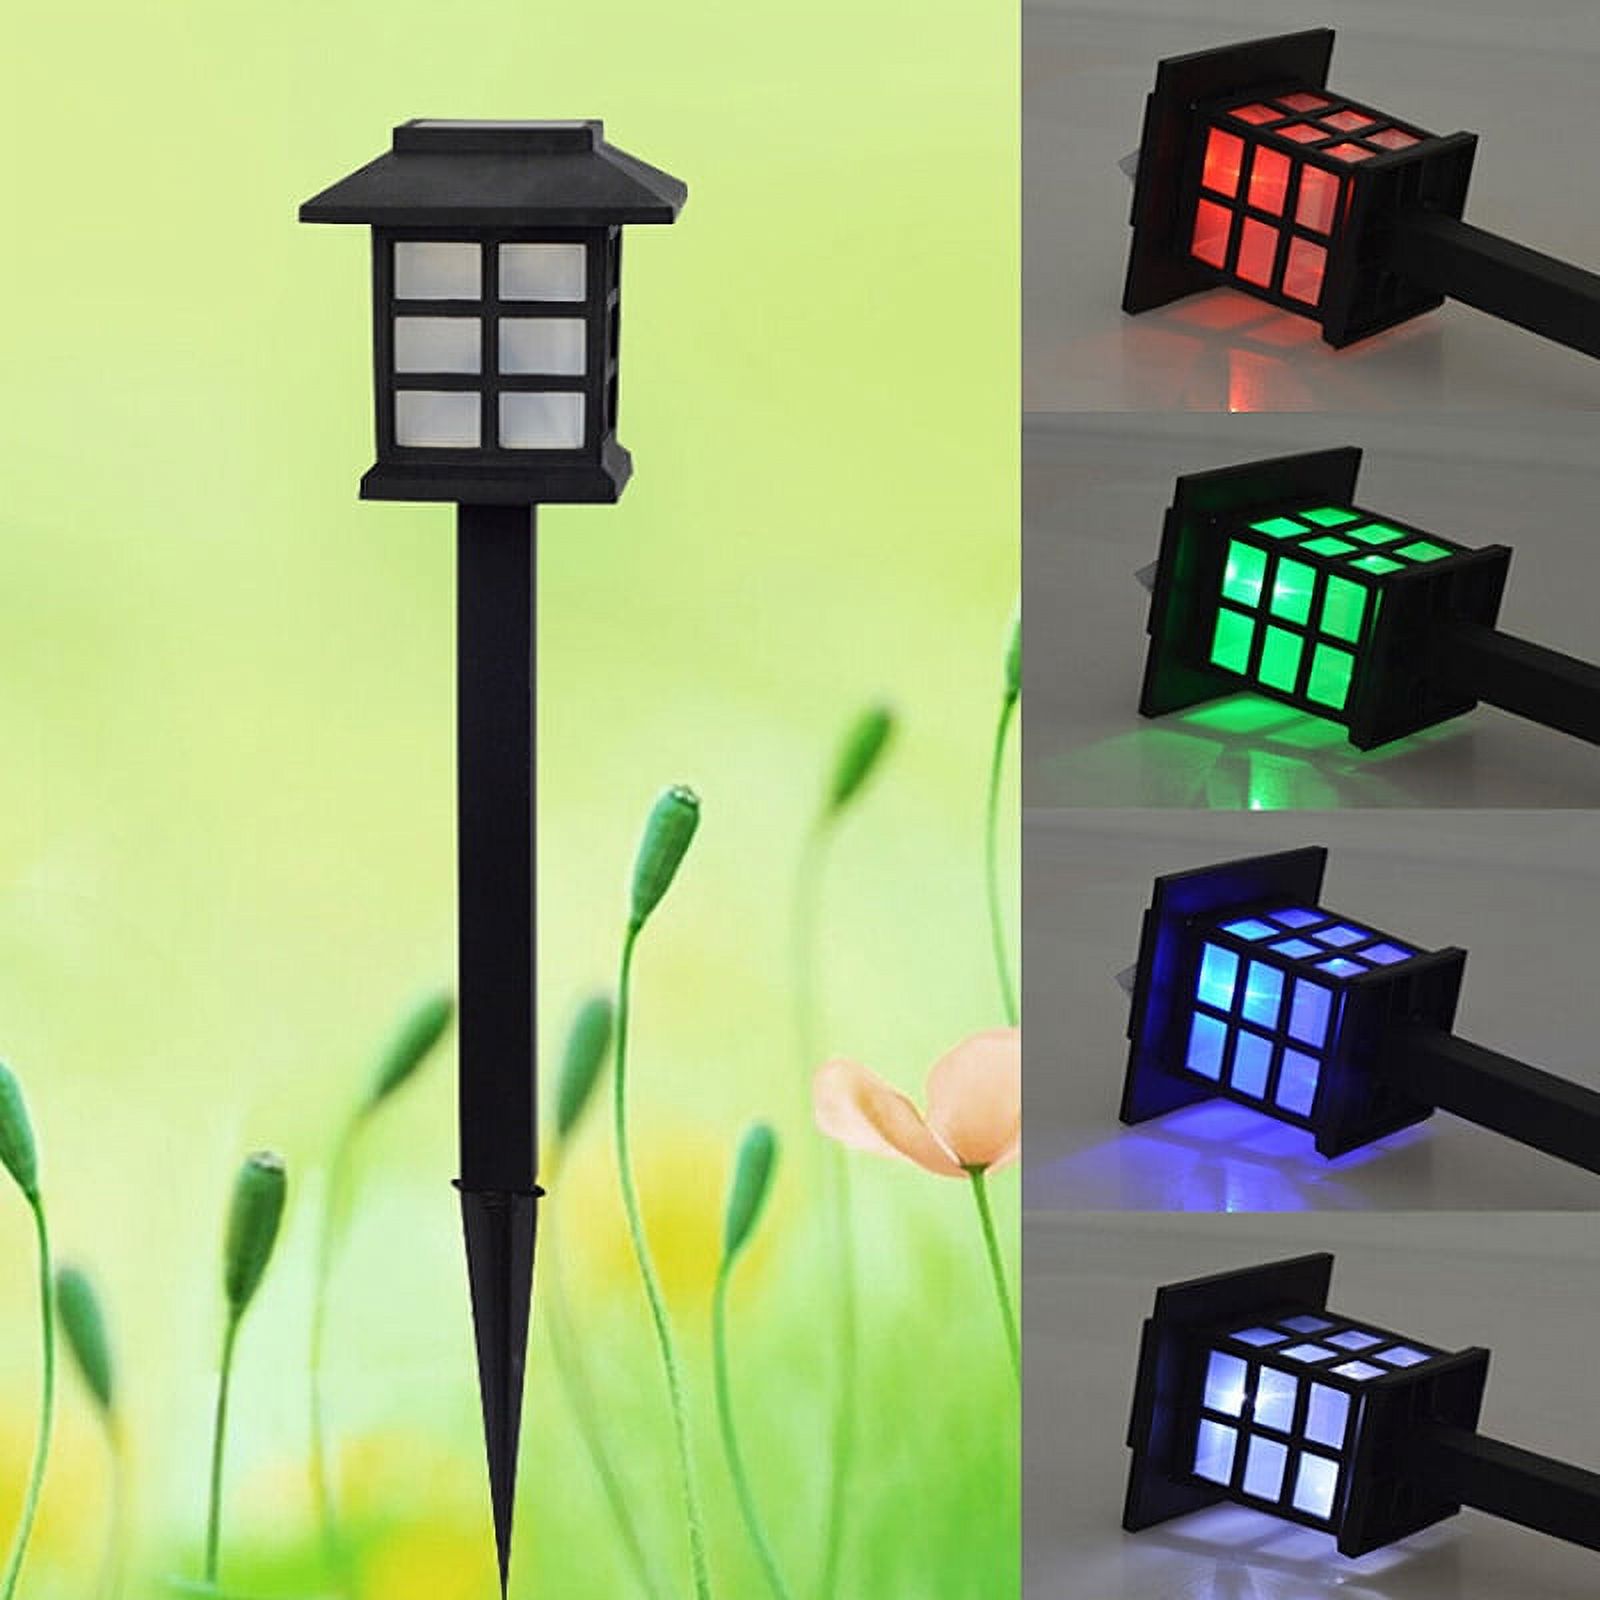 2 Pcs Solar Pathway Lights Outdoor LED Solar Powered Garden Lights for Lawn Patio Yard;2 Pcs Solar Pathway Lights Outdoor LED Solar Powered Garden Lights - image 2 of 9